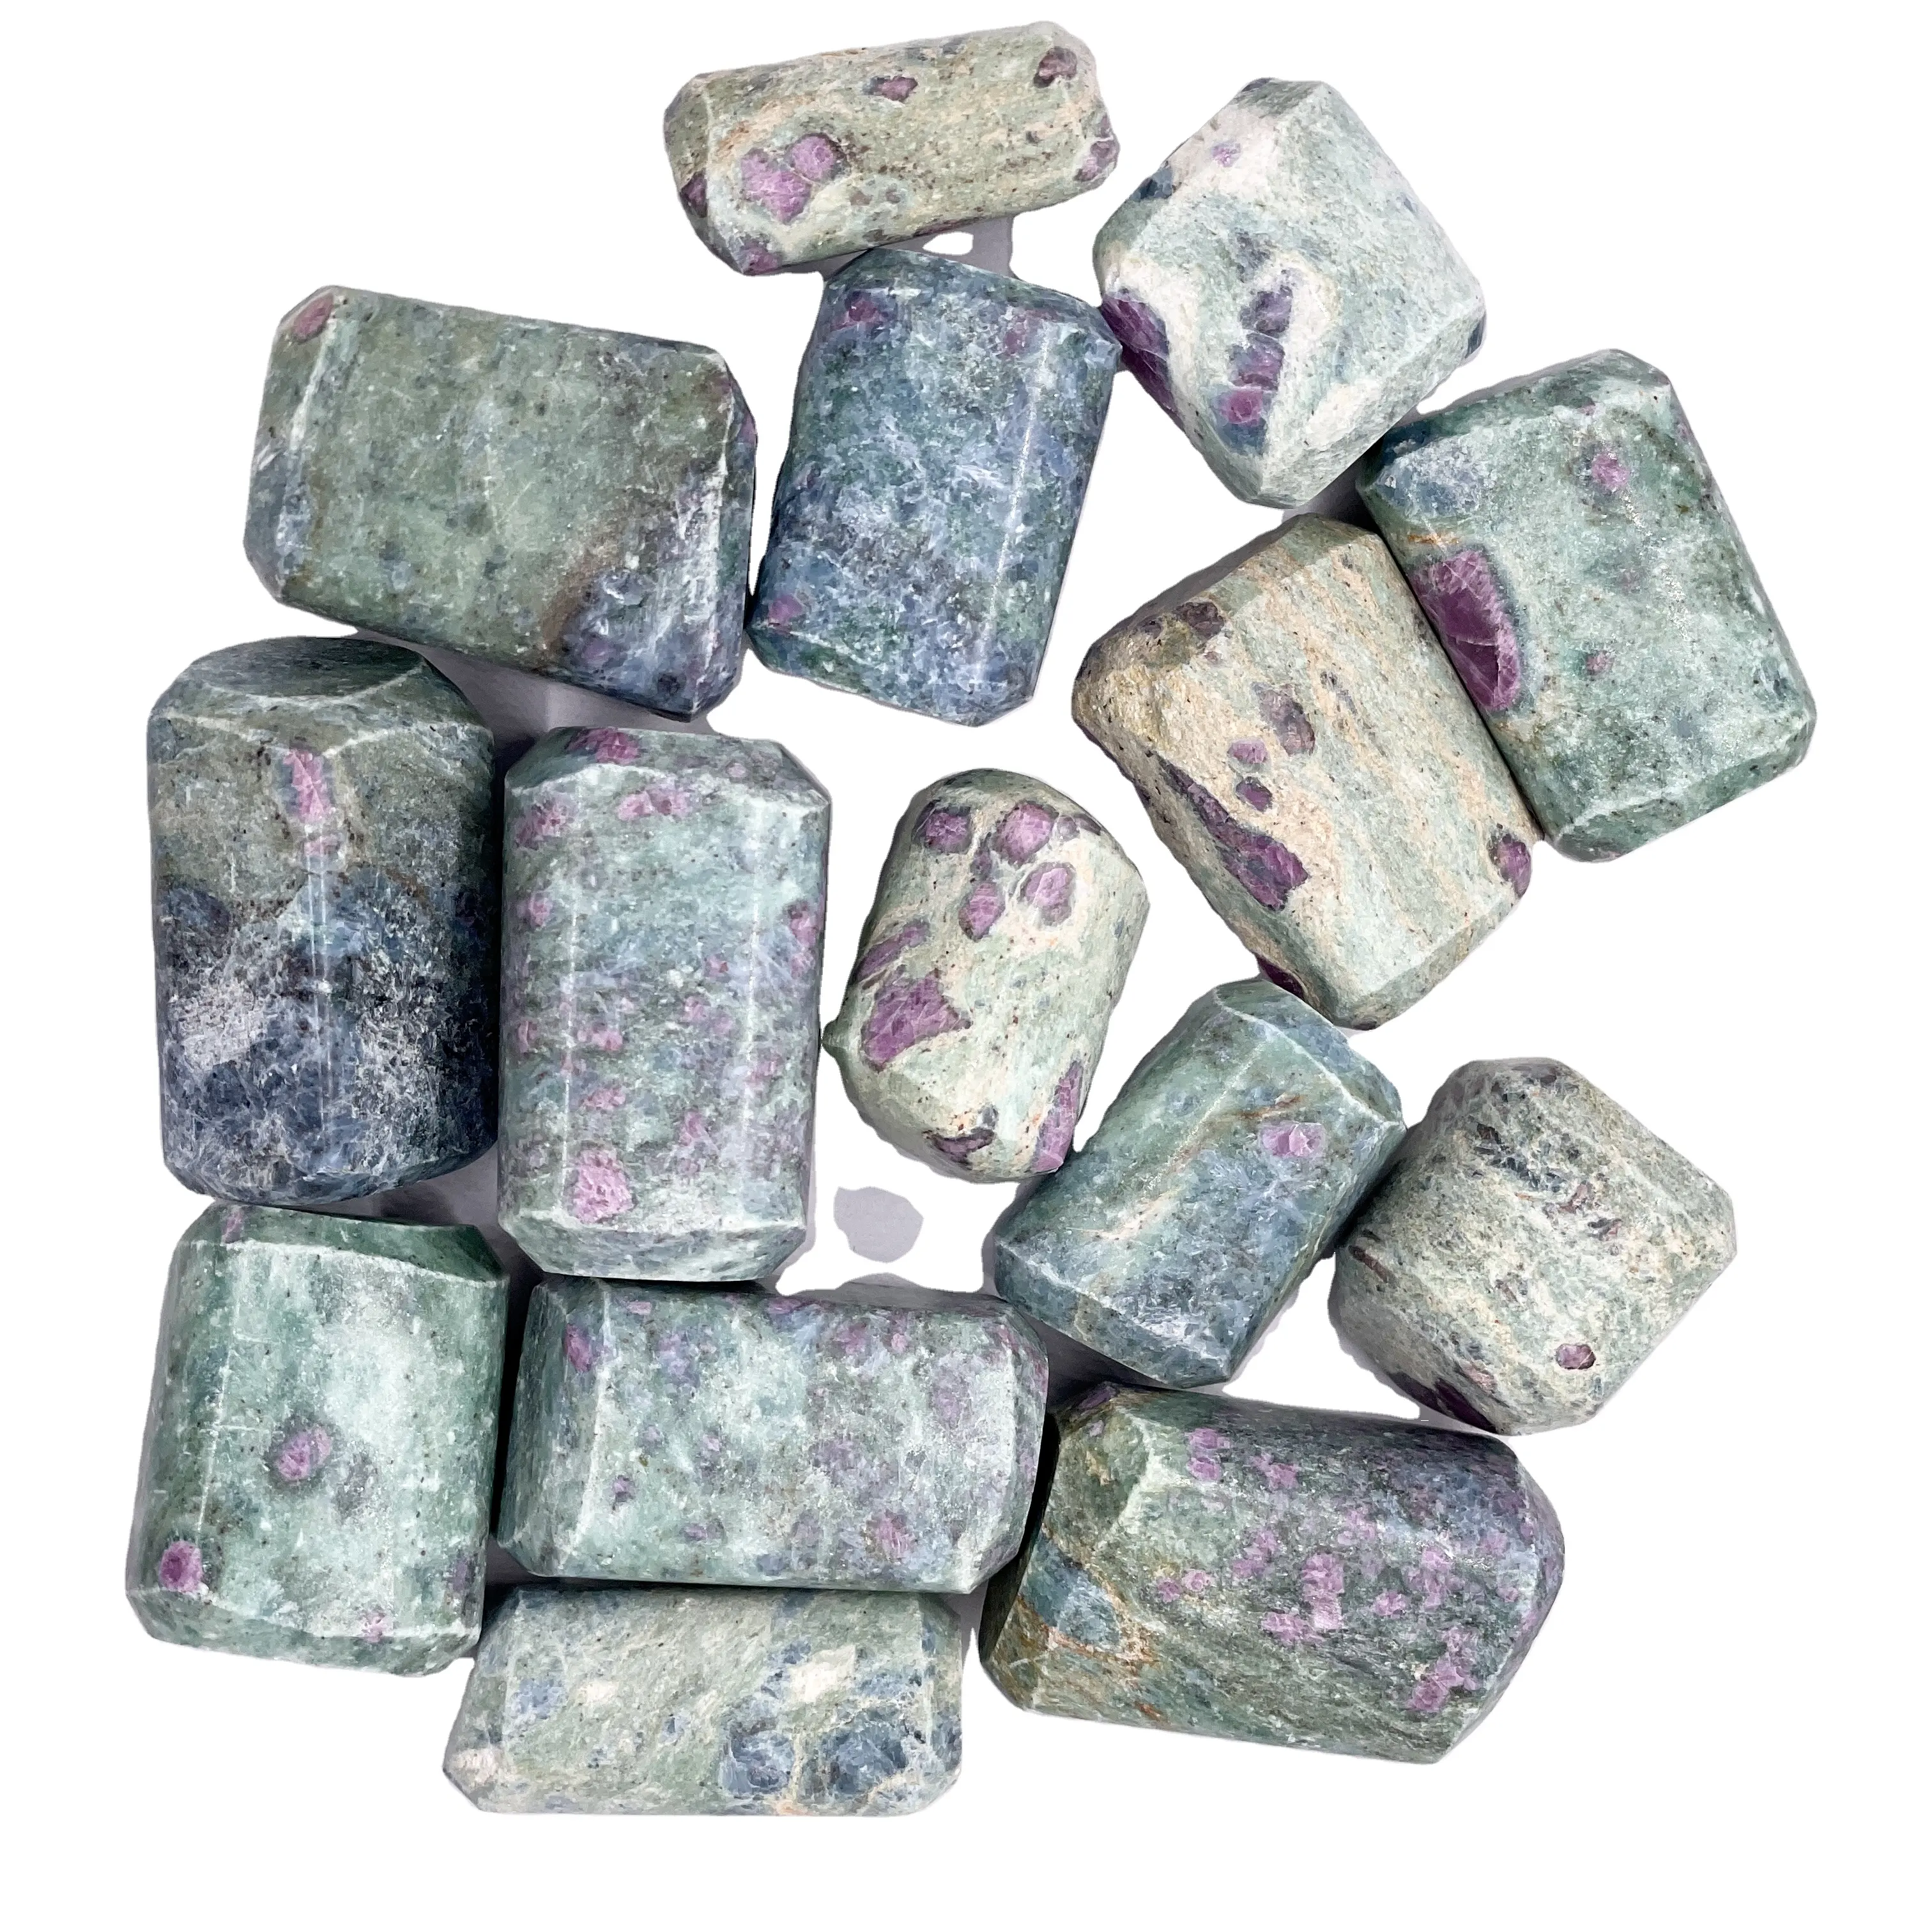 Ruby Zoisite Healing Tumbled Stones Crafts Agate Jewelry Semi-precious Stone Making for Home Decoration Bulk Wholesale Natural